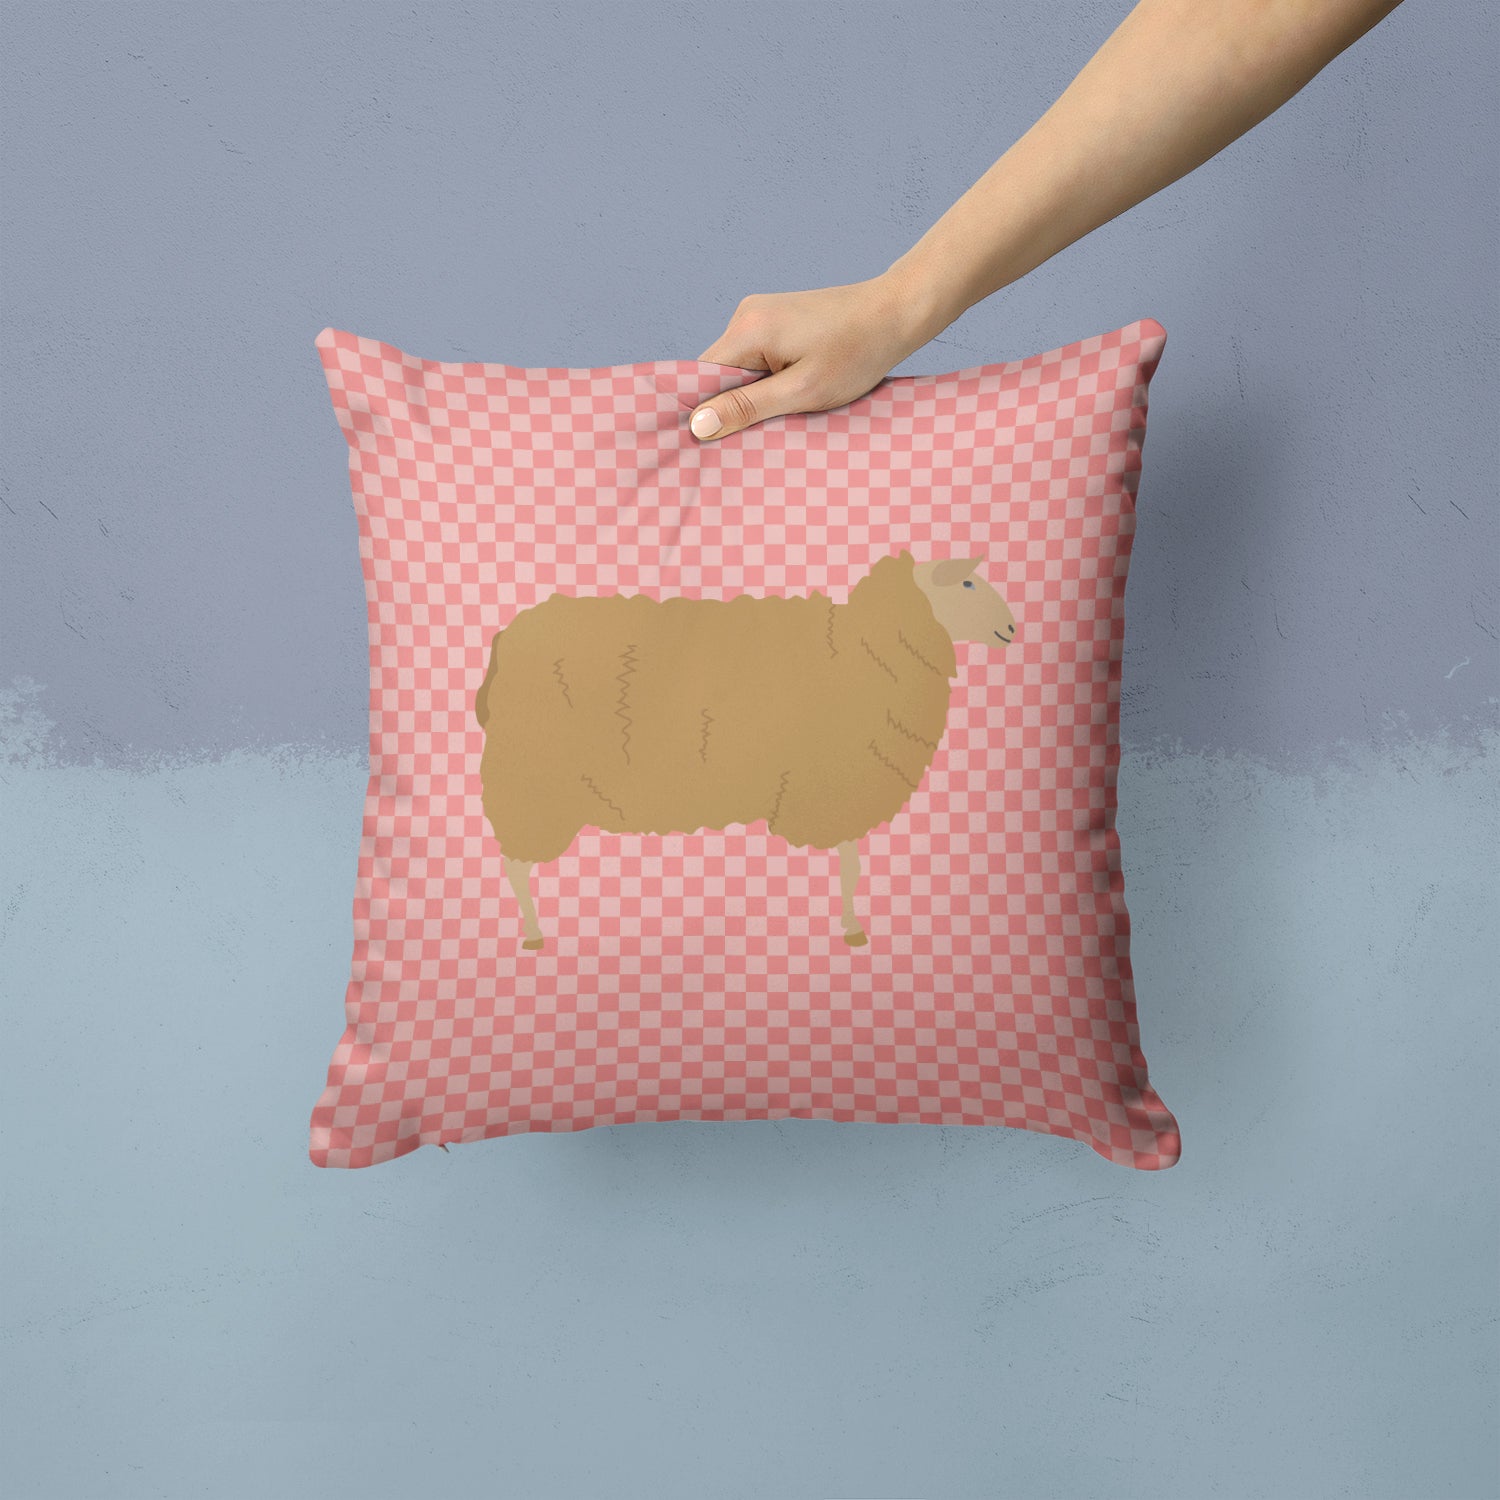 East Friesian Sheep Pink Check Fabric Decorative Pillow BB7977PW1414 - the-store.com